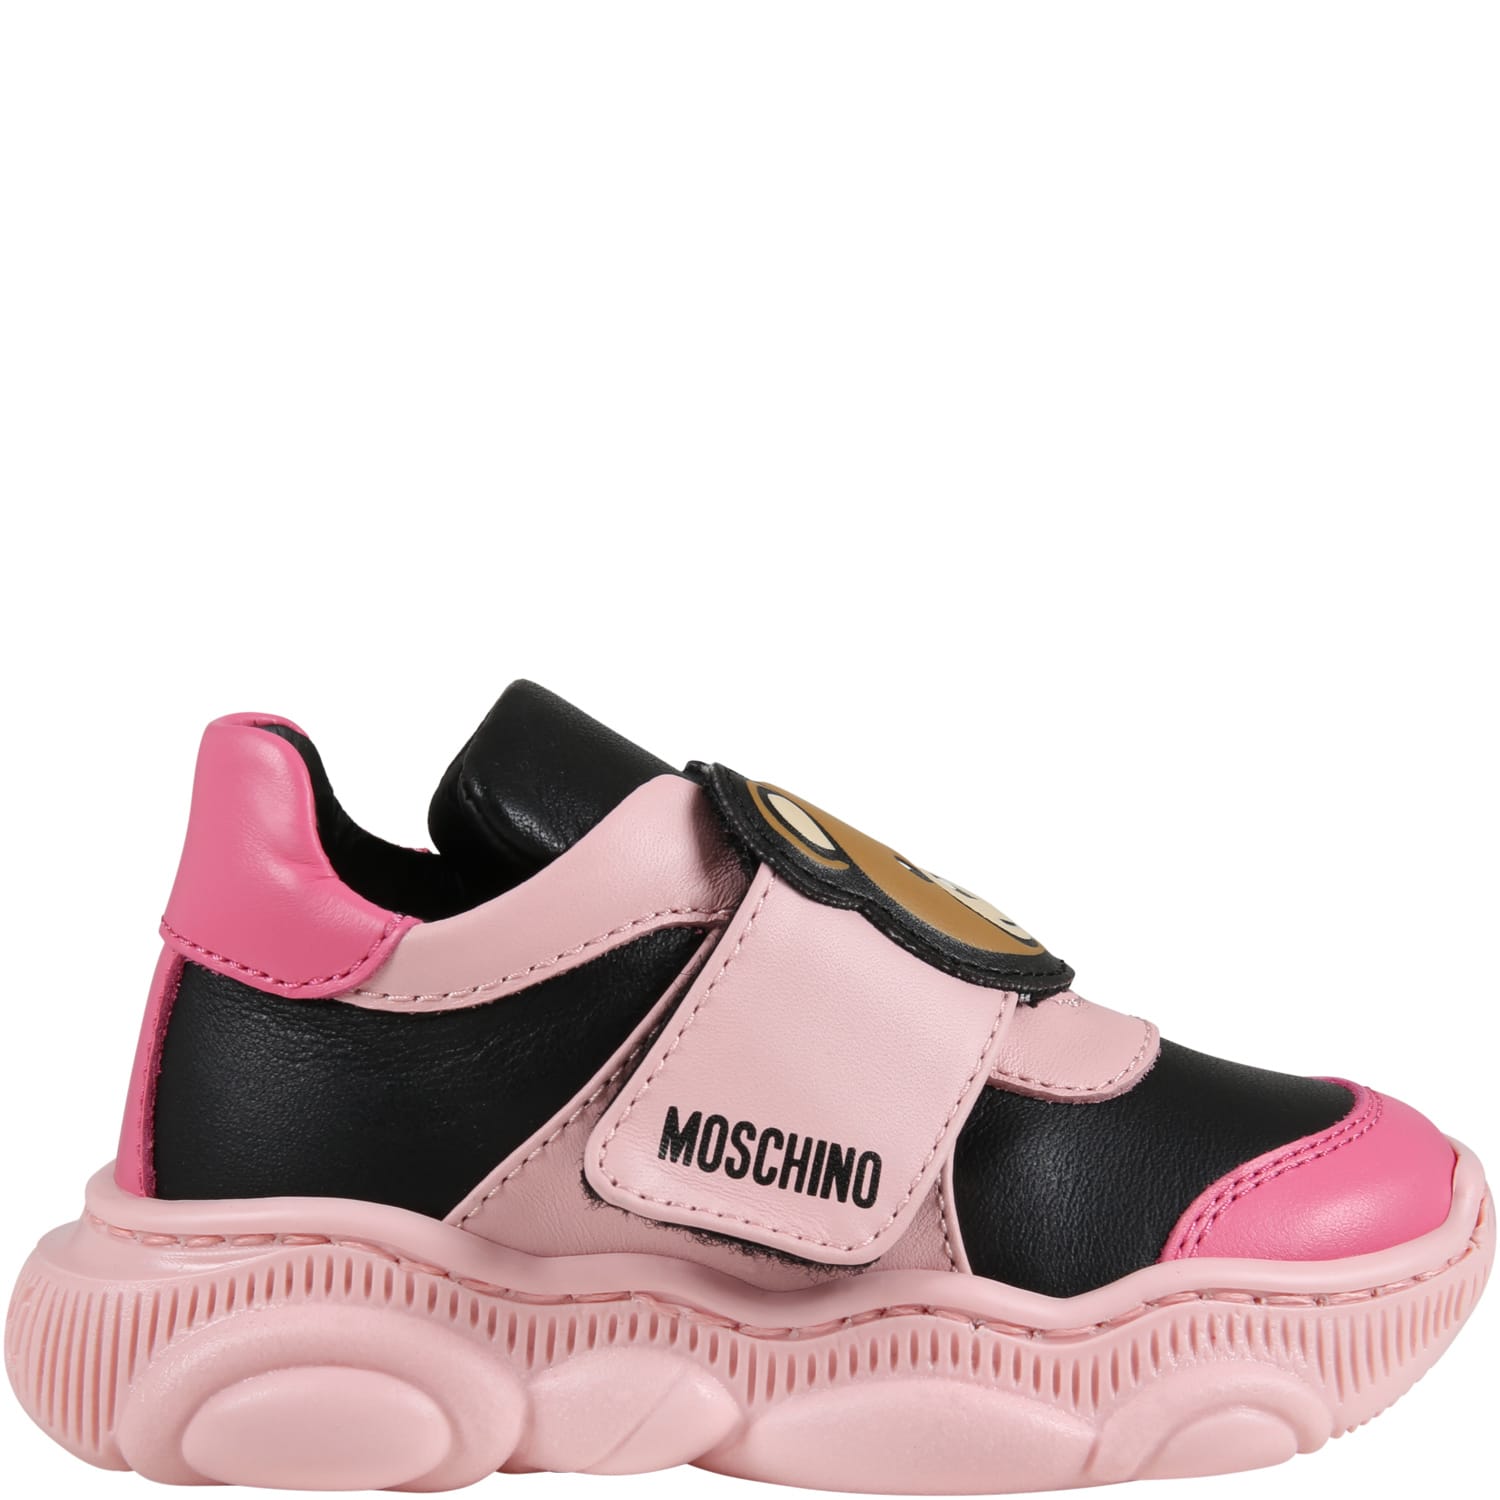 Moschino Multicolor Sneakers For Baby Girl